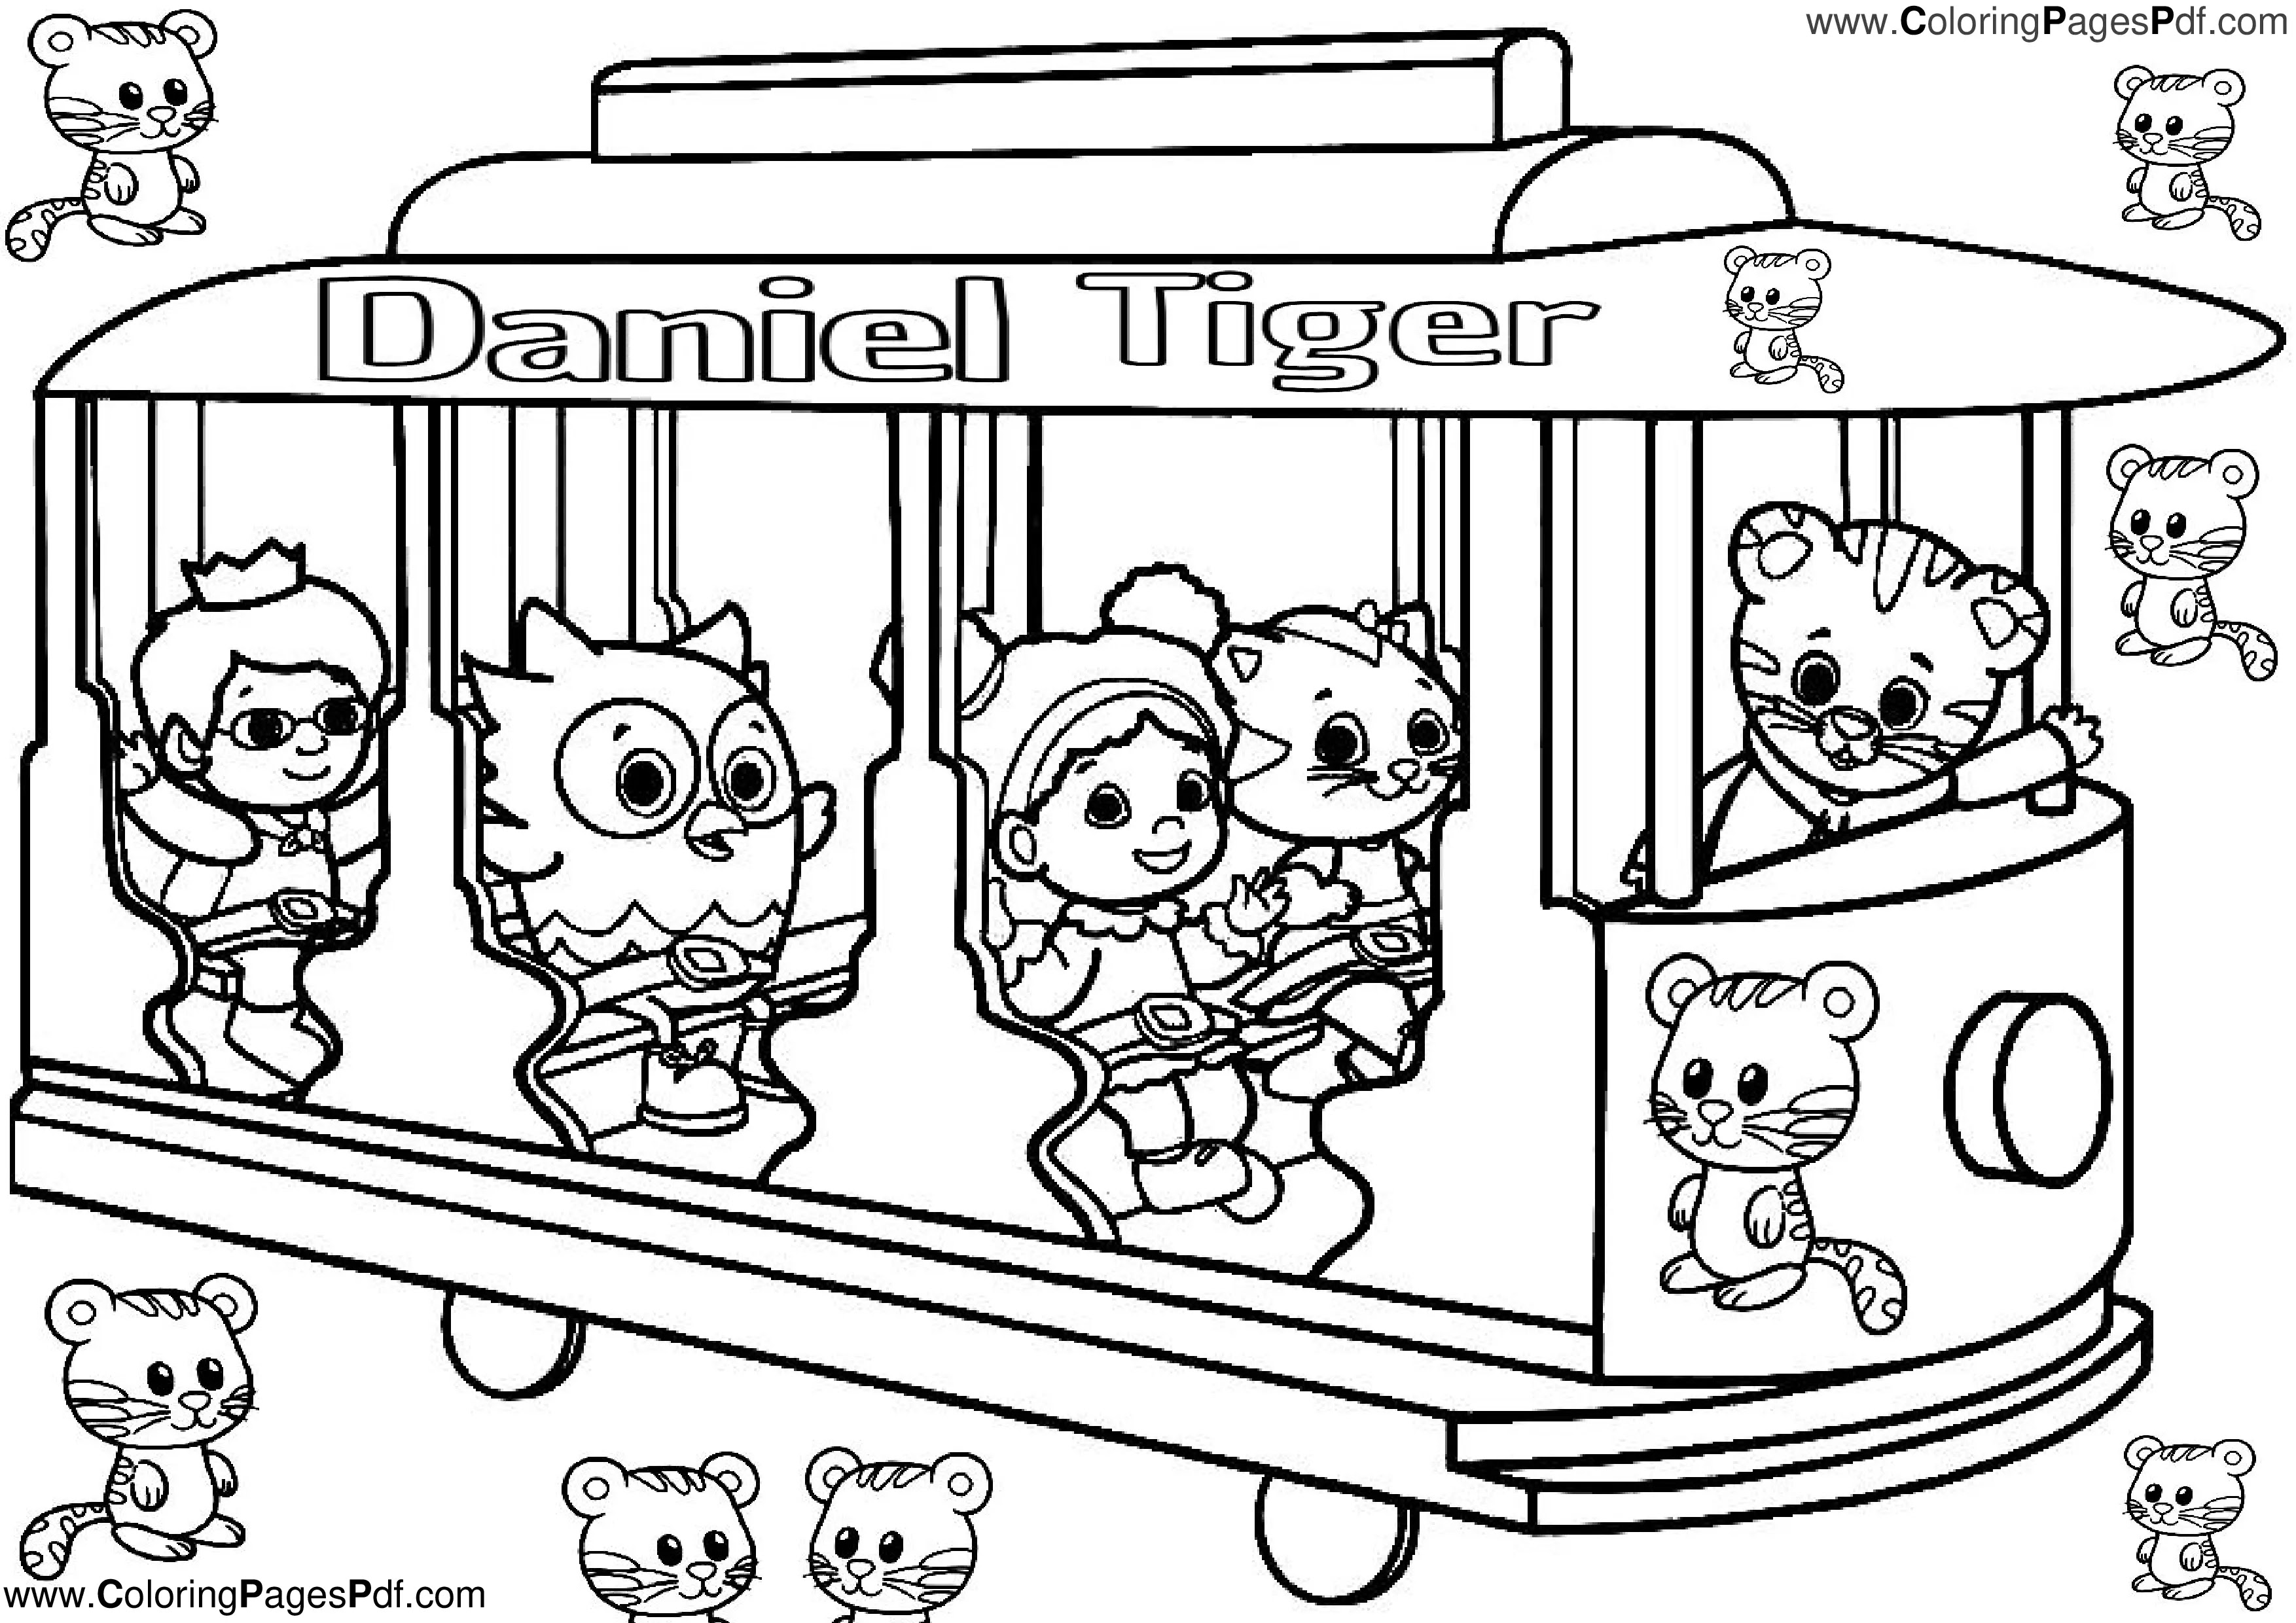 Daniel tiger coloring pages for kids